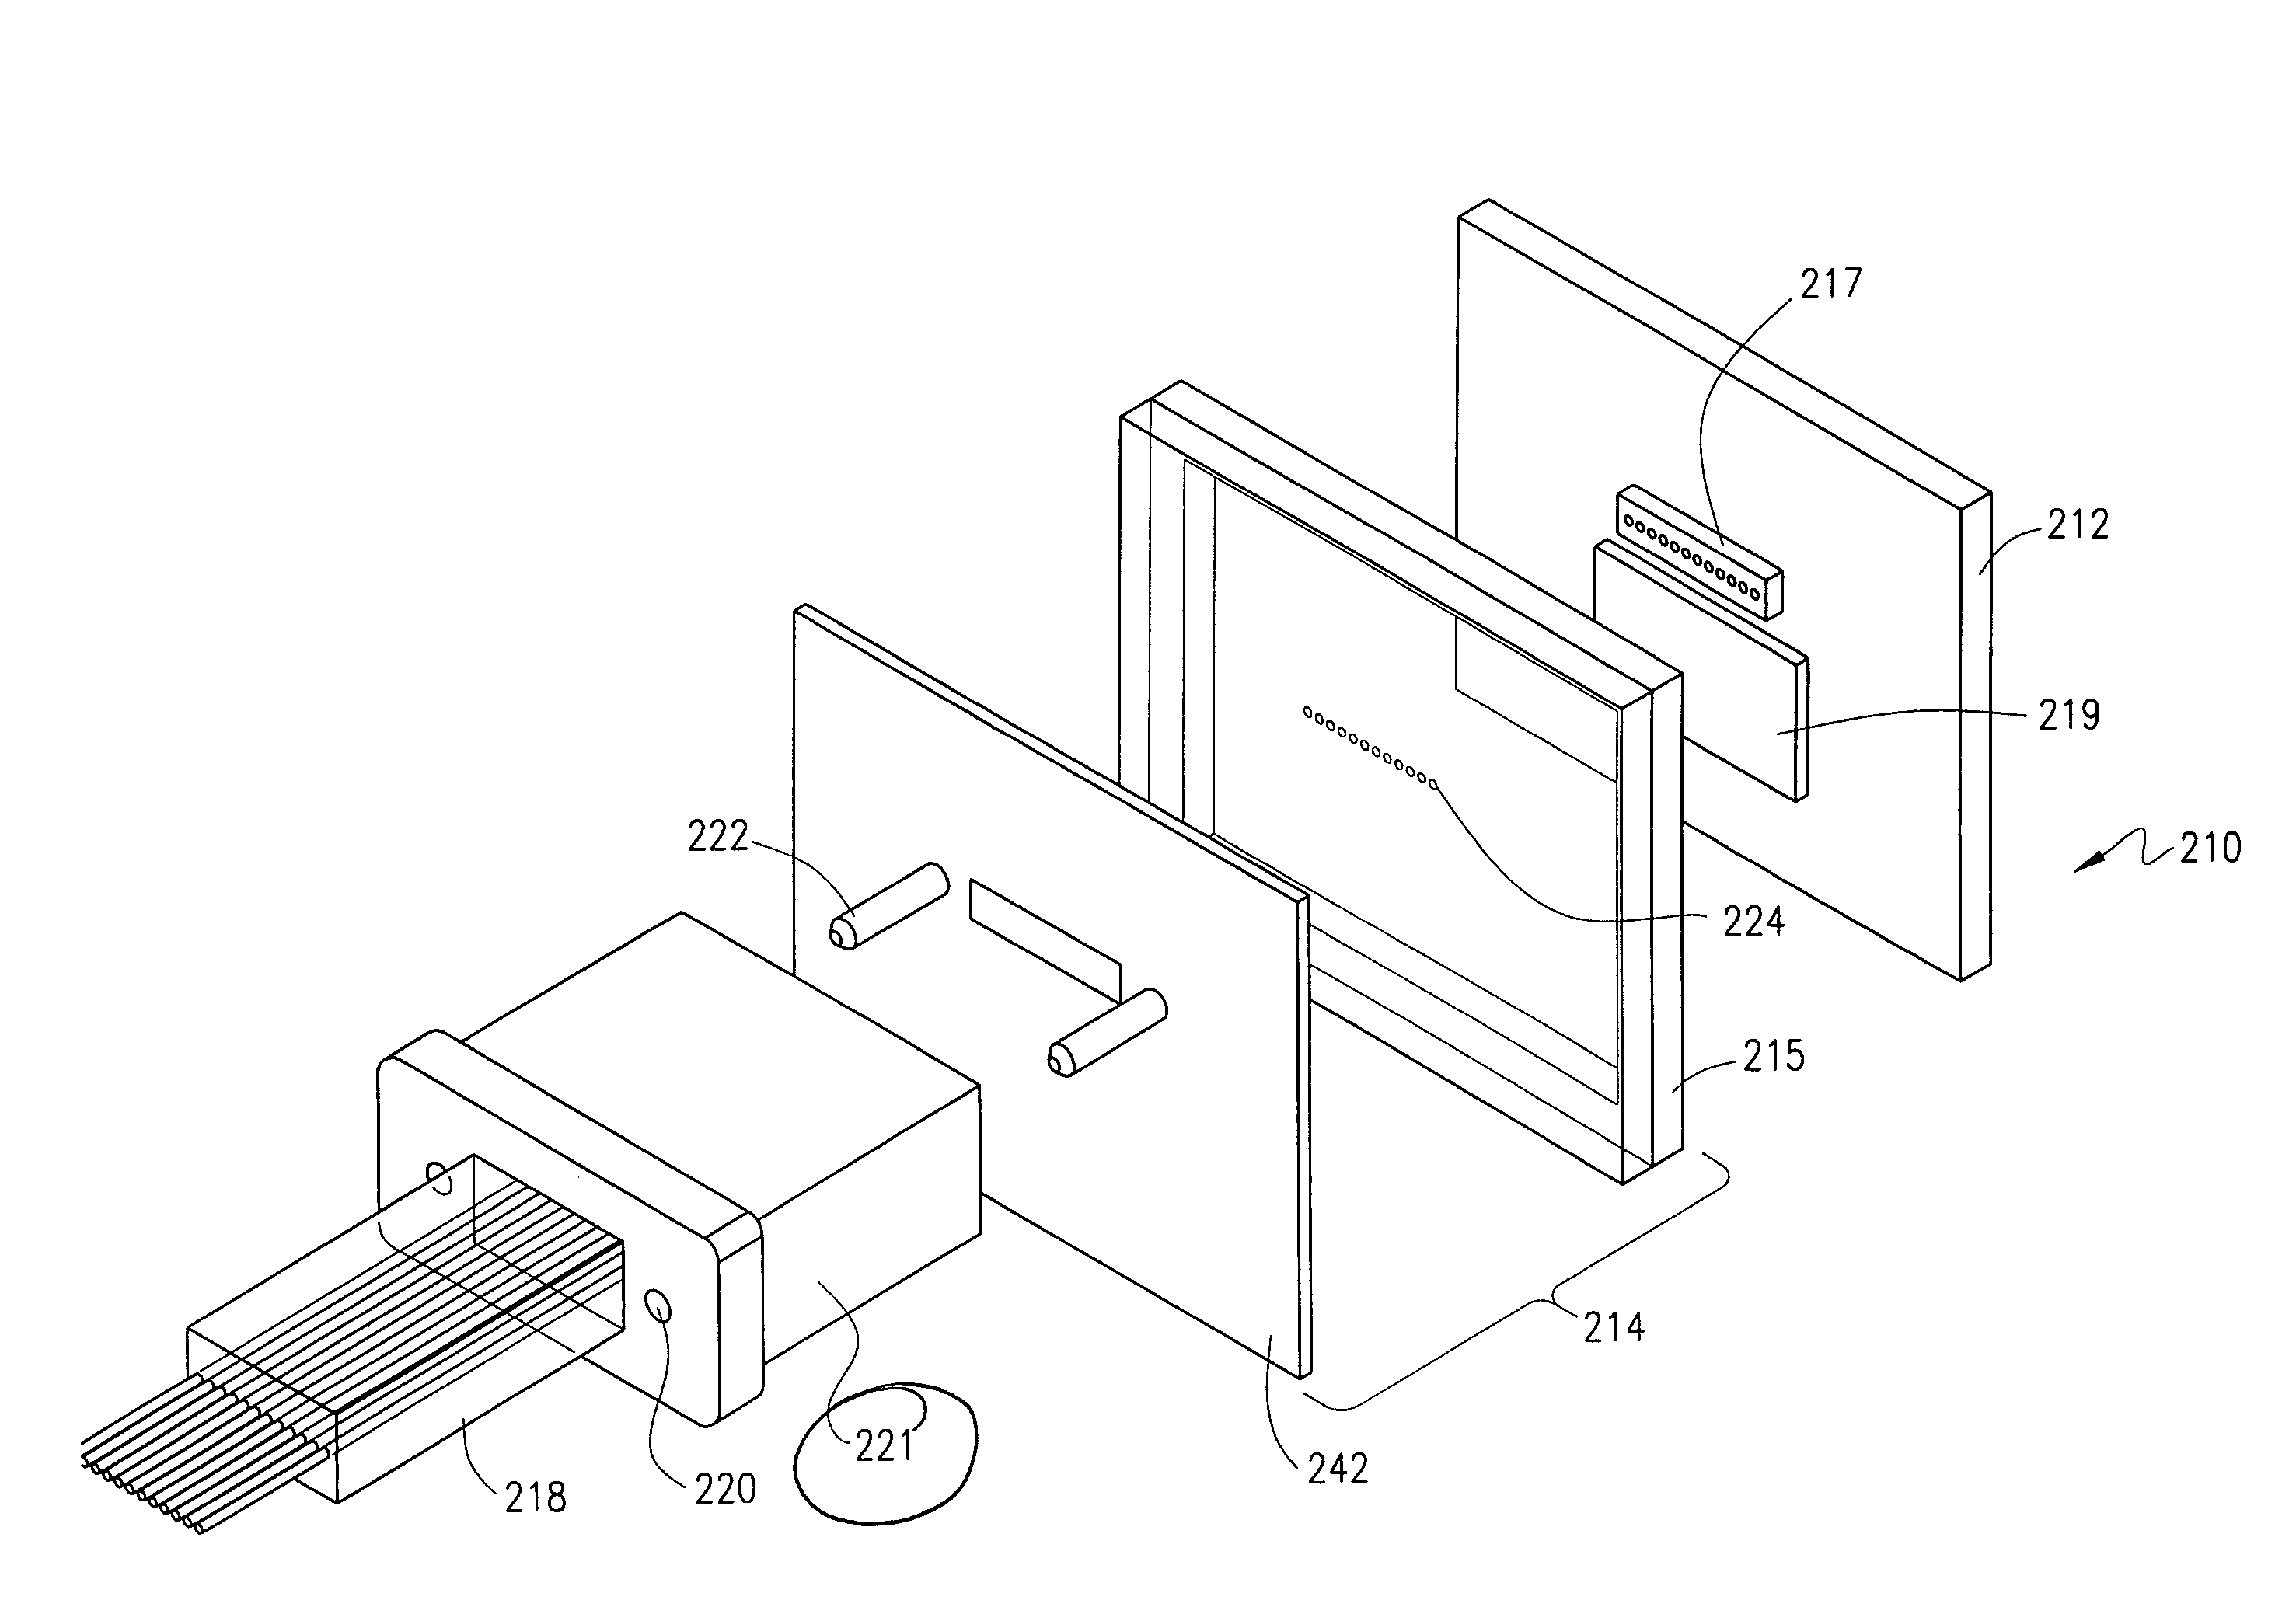 Optical device, enclosure and method of fabricating